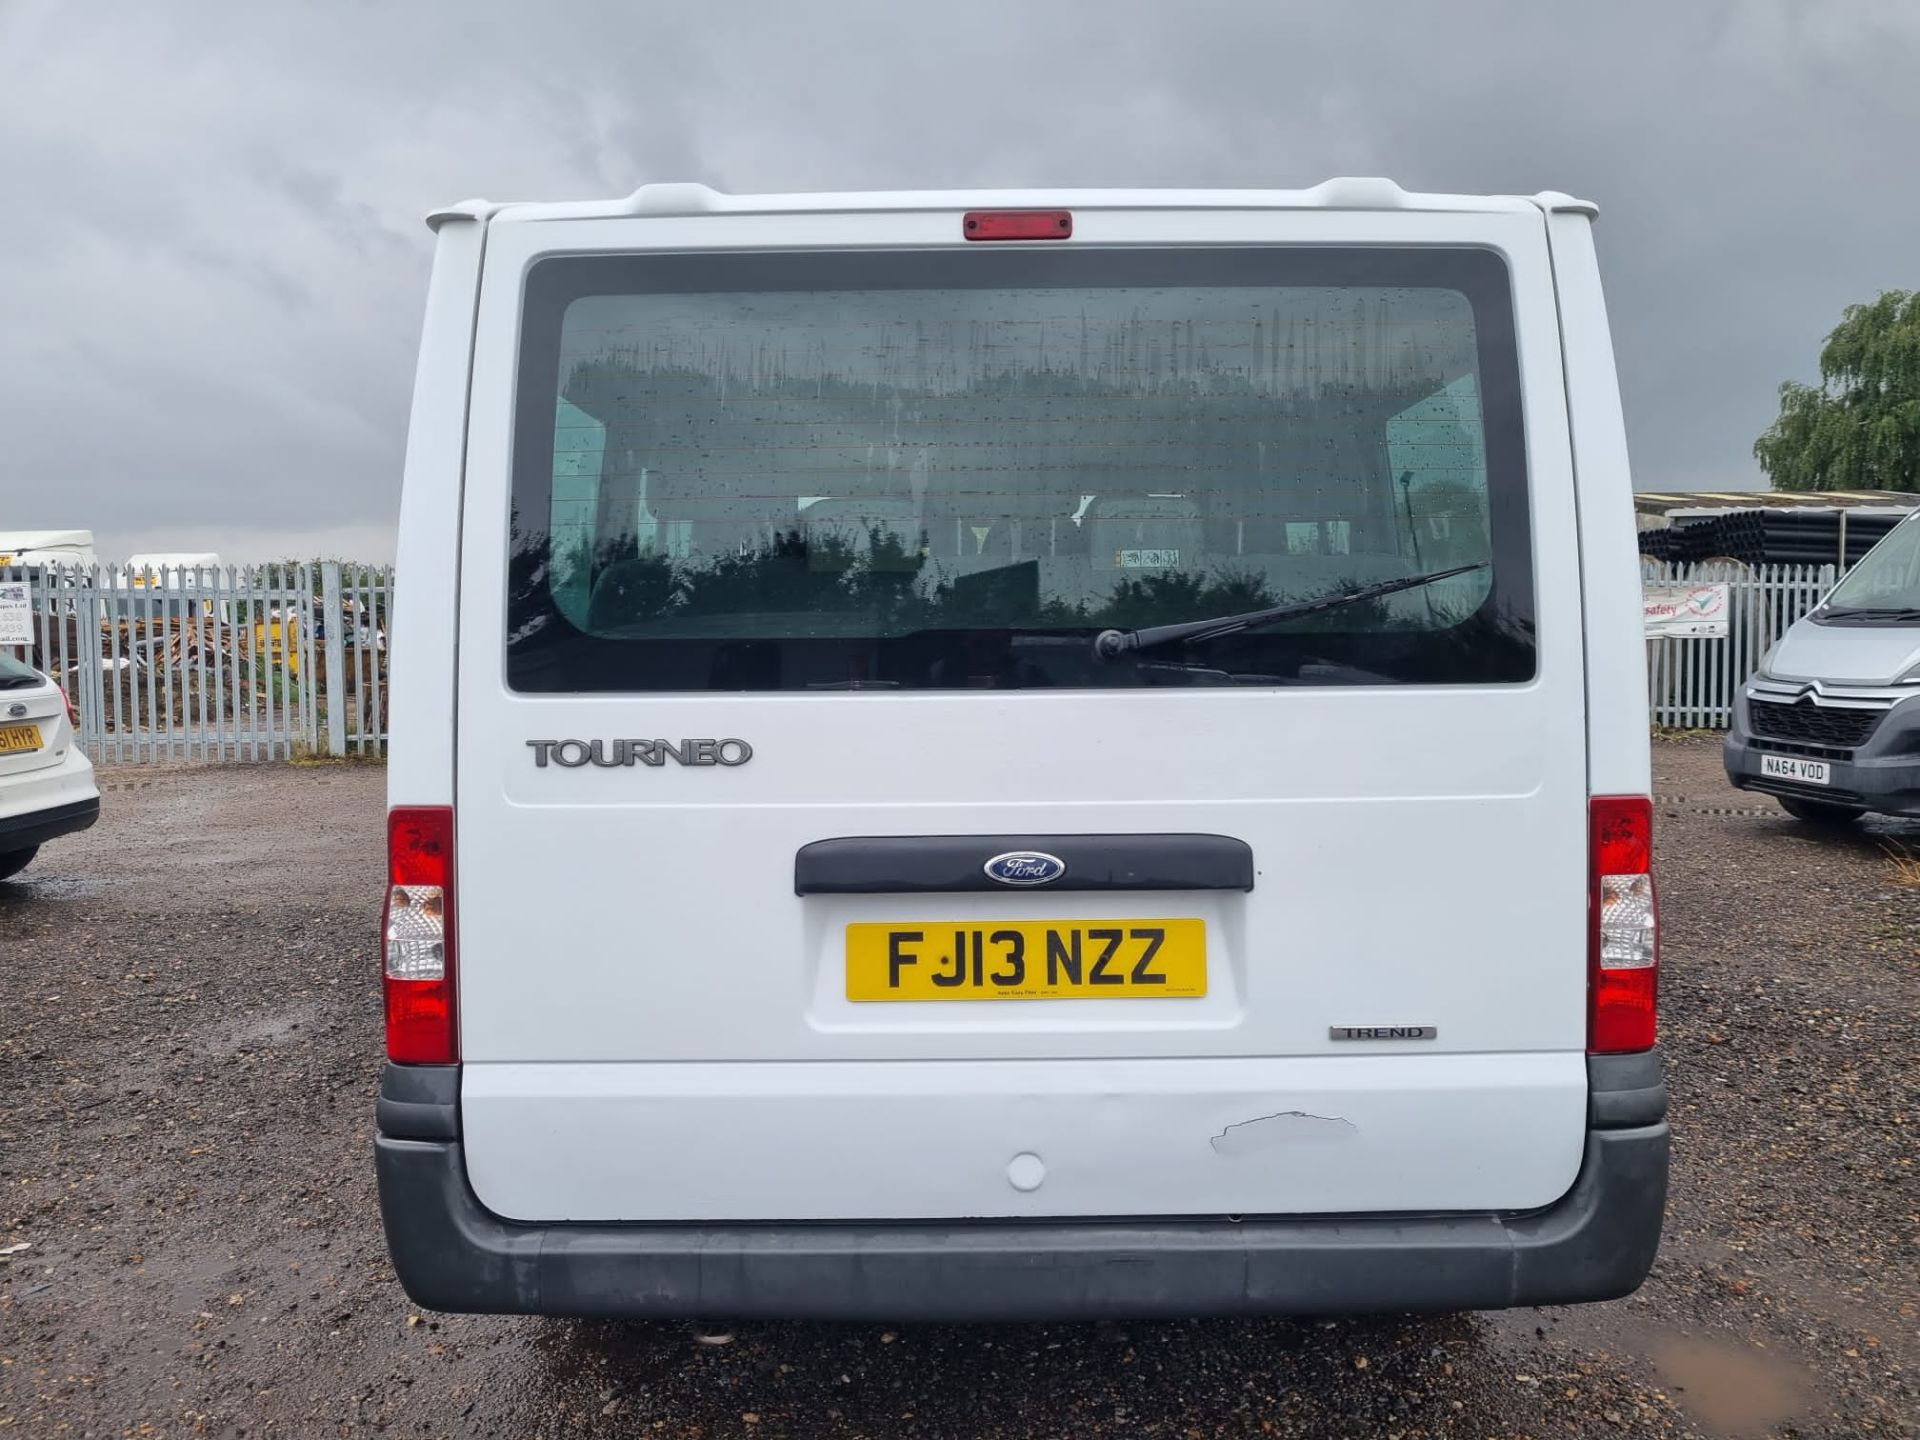 Ford Transit 2.2 TDCI Trend 2013 '13 Reg' 9 seats - Air Con - Cruise Control - Image 7 of 13